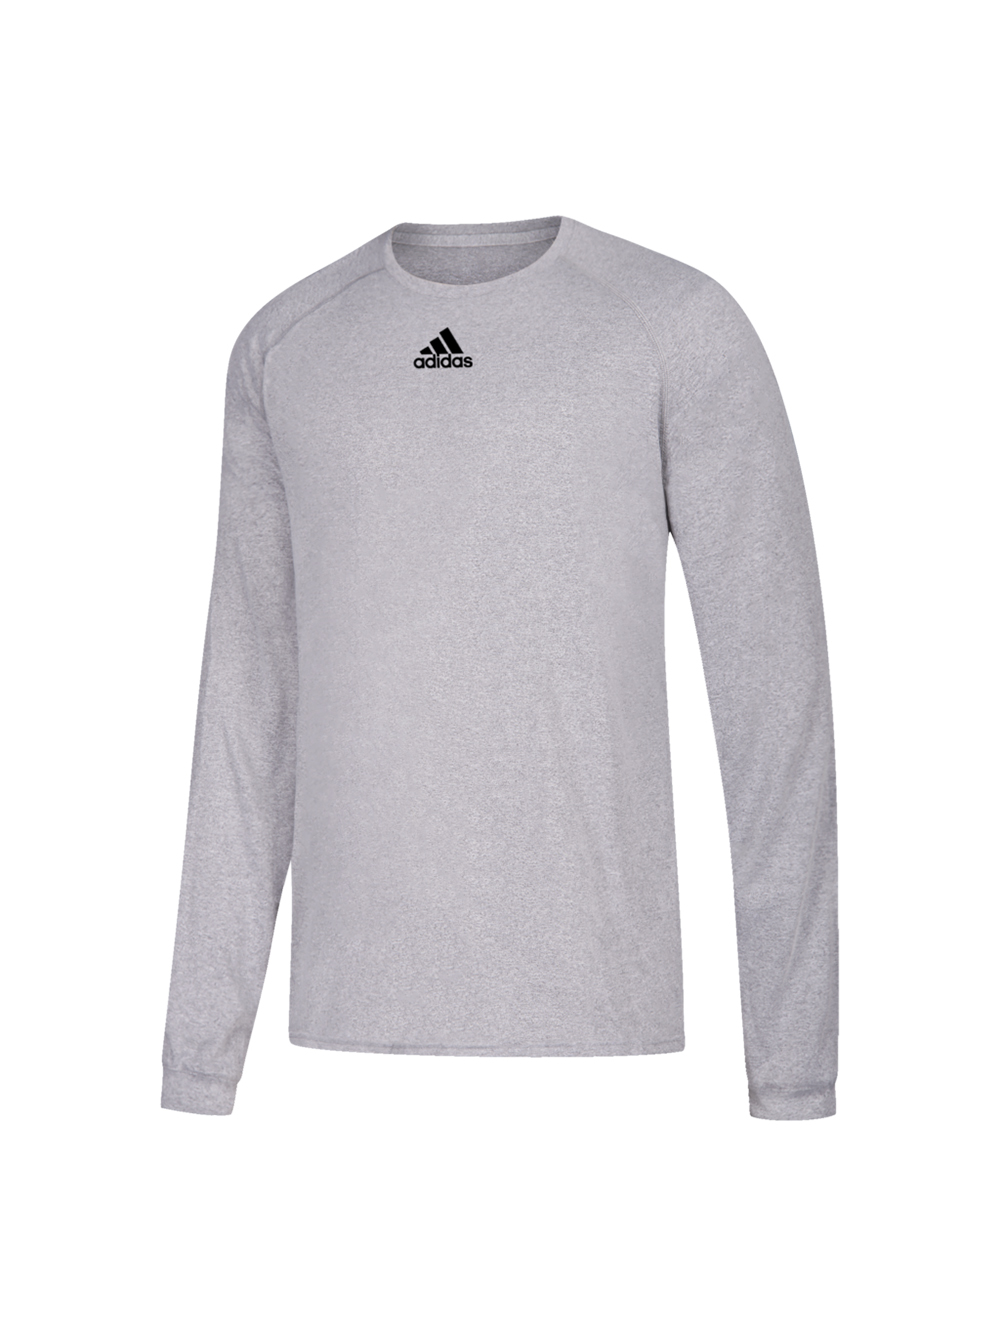 Small Adidas D2M Tee - Heather Gray Climalite NWT